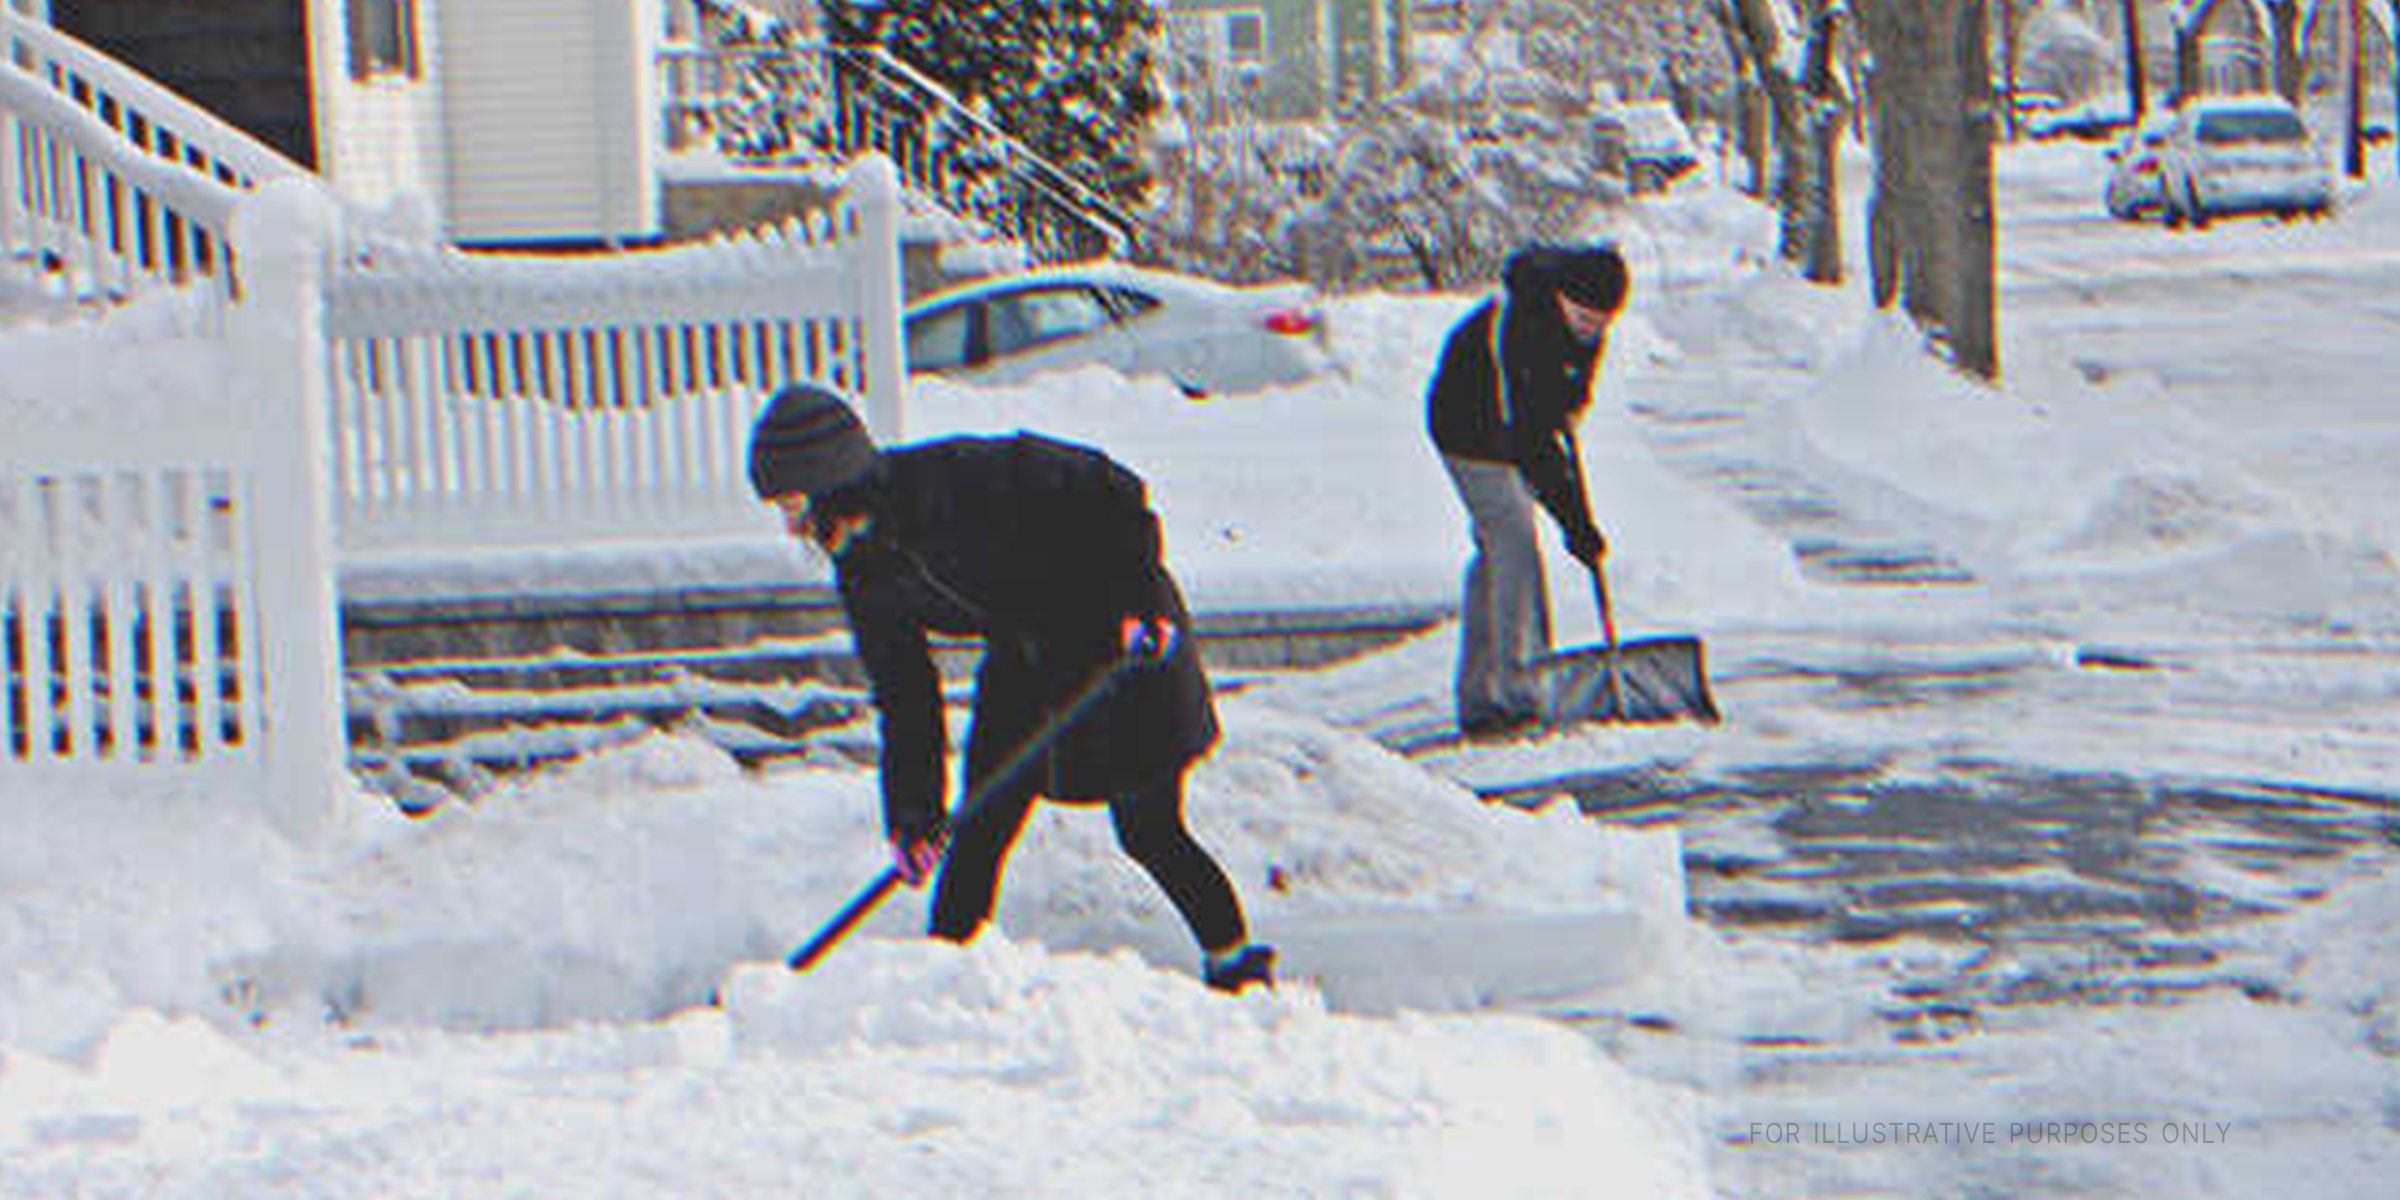 Two men shoveling snow. | Flickr / unnormalized (CC BY-SA 2.0)